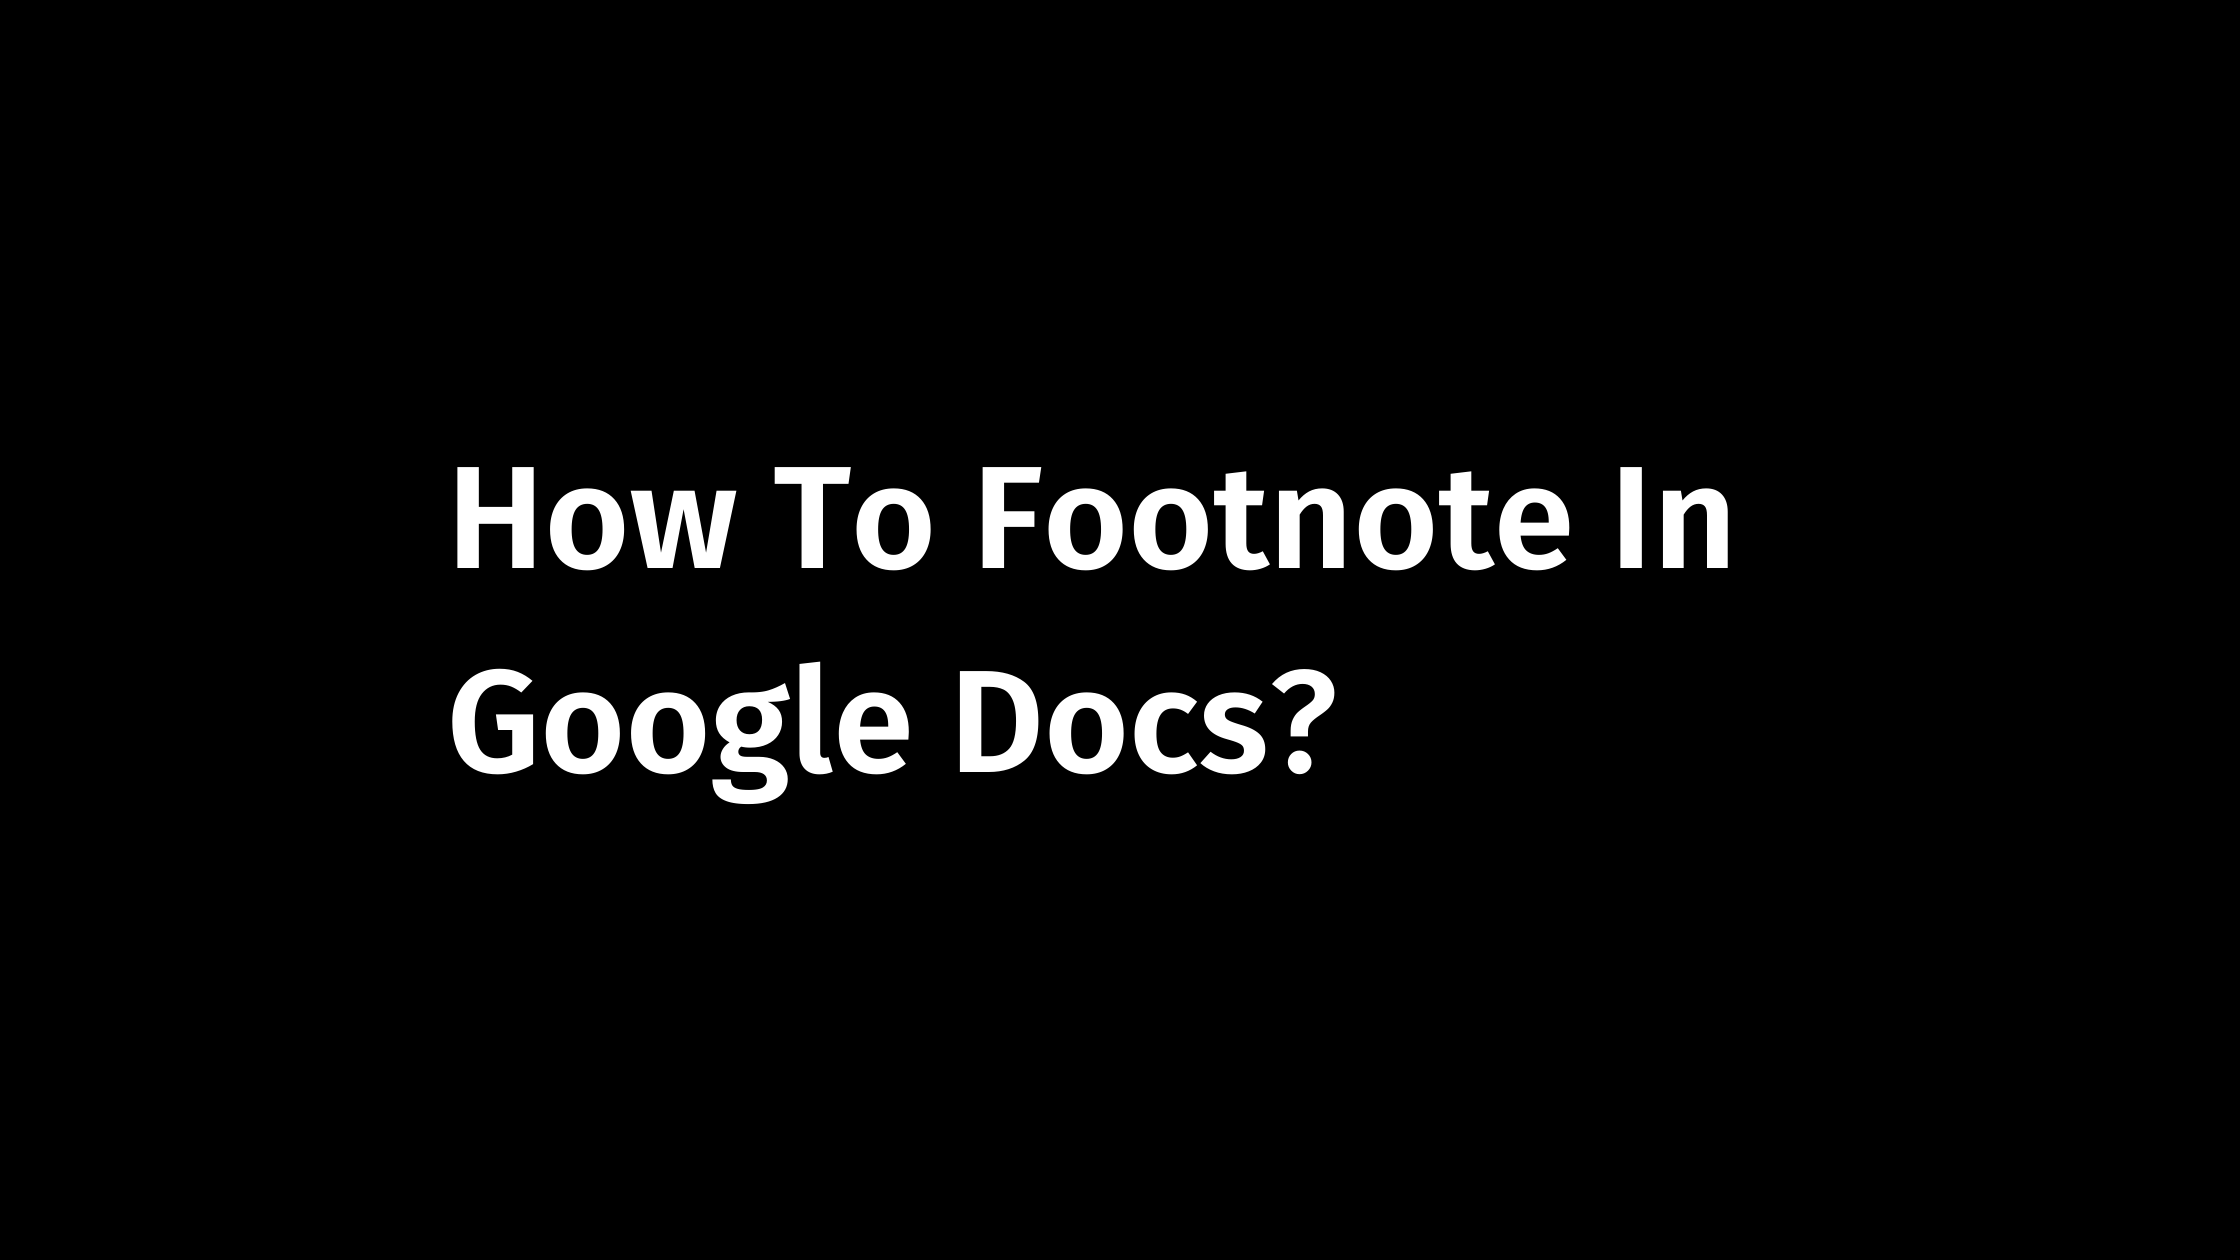 How To Footnote In Google Docs